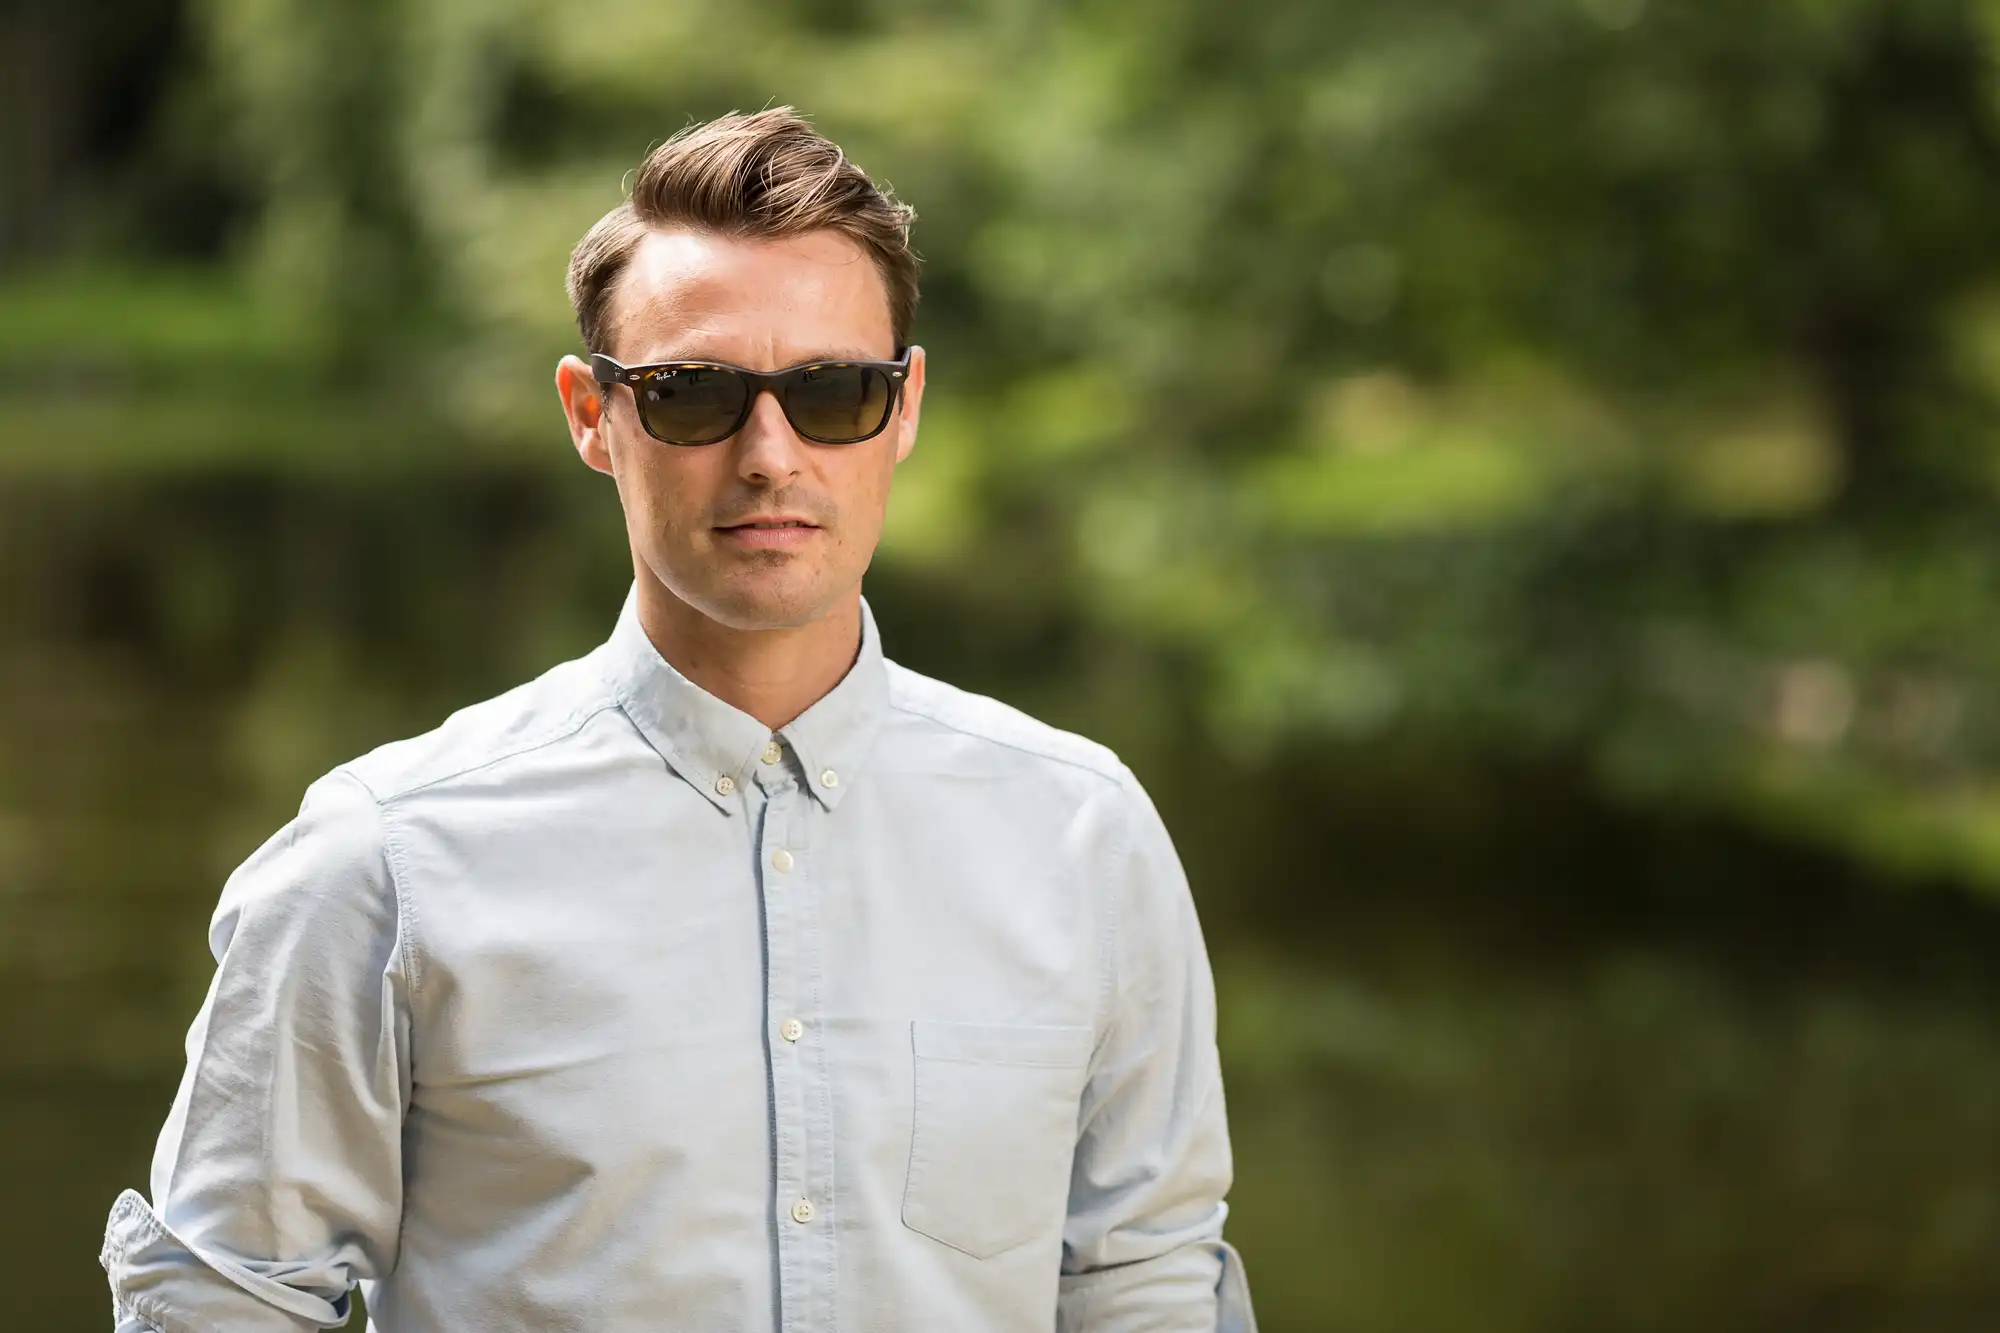 A man wearing sunglasses and a light blue shirt stands outdoors with trees and a river in the background.